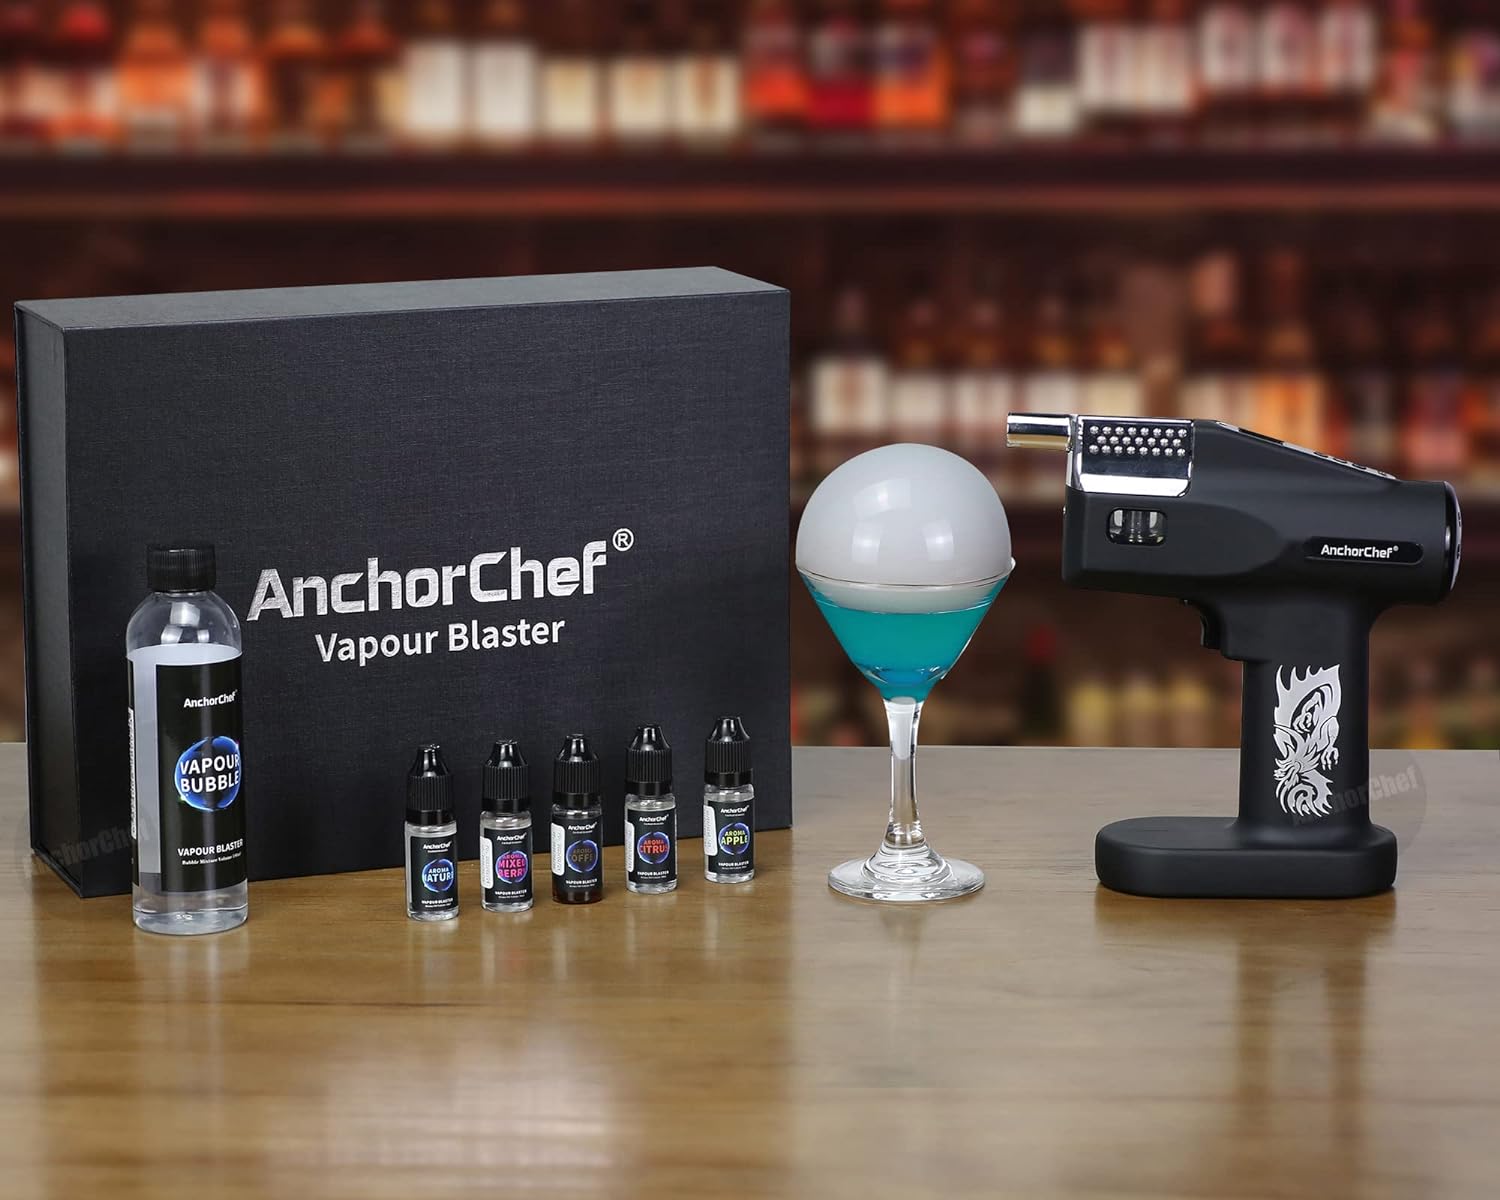 This is among the best cocktail gifts for party tricks: The Vapour Blaster Cocktail Gun